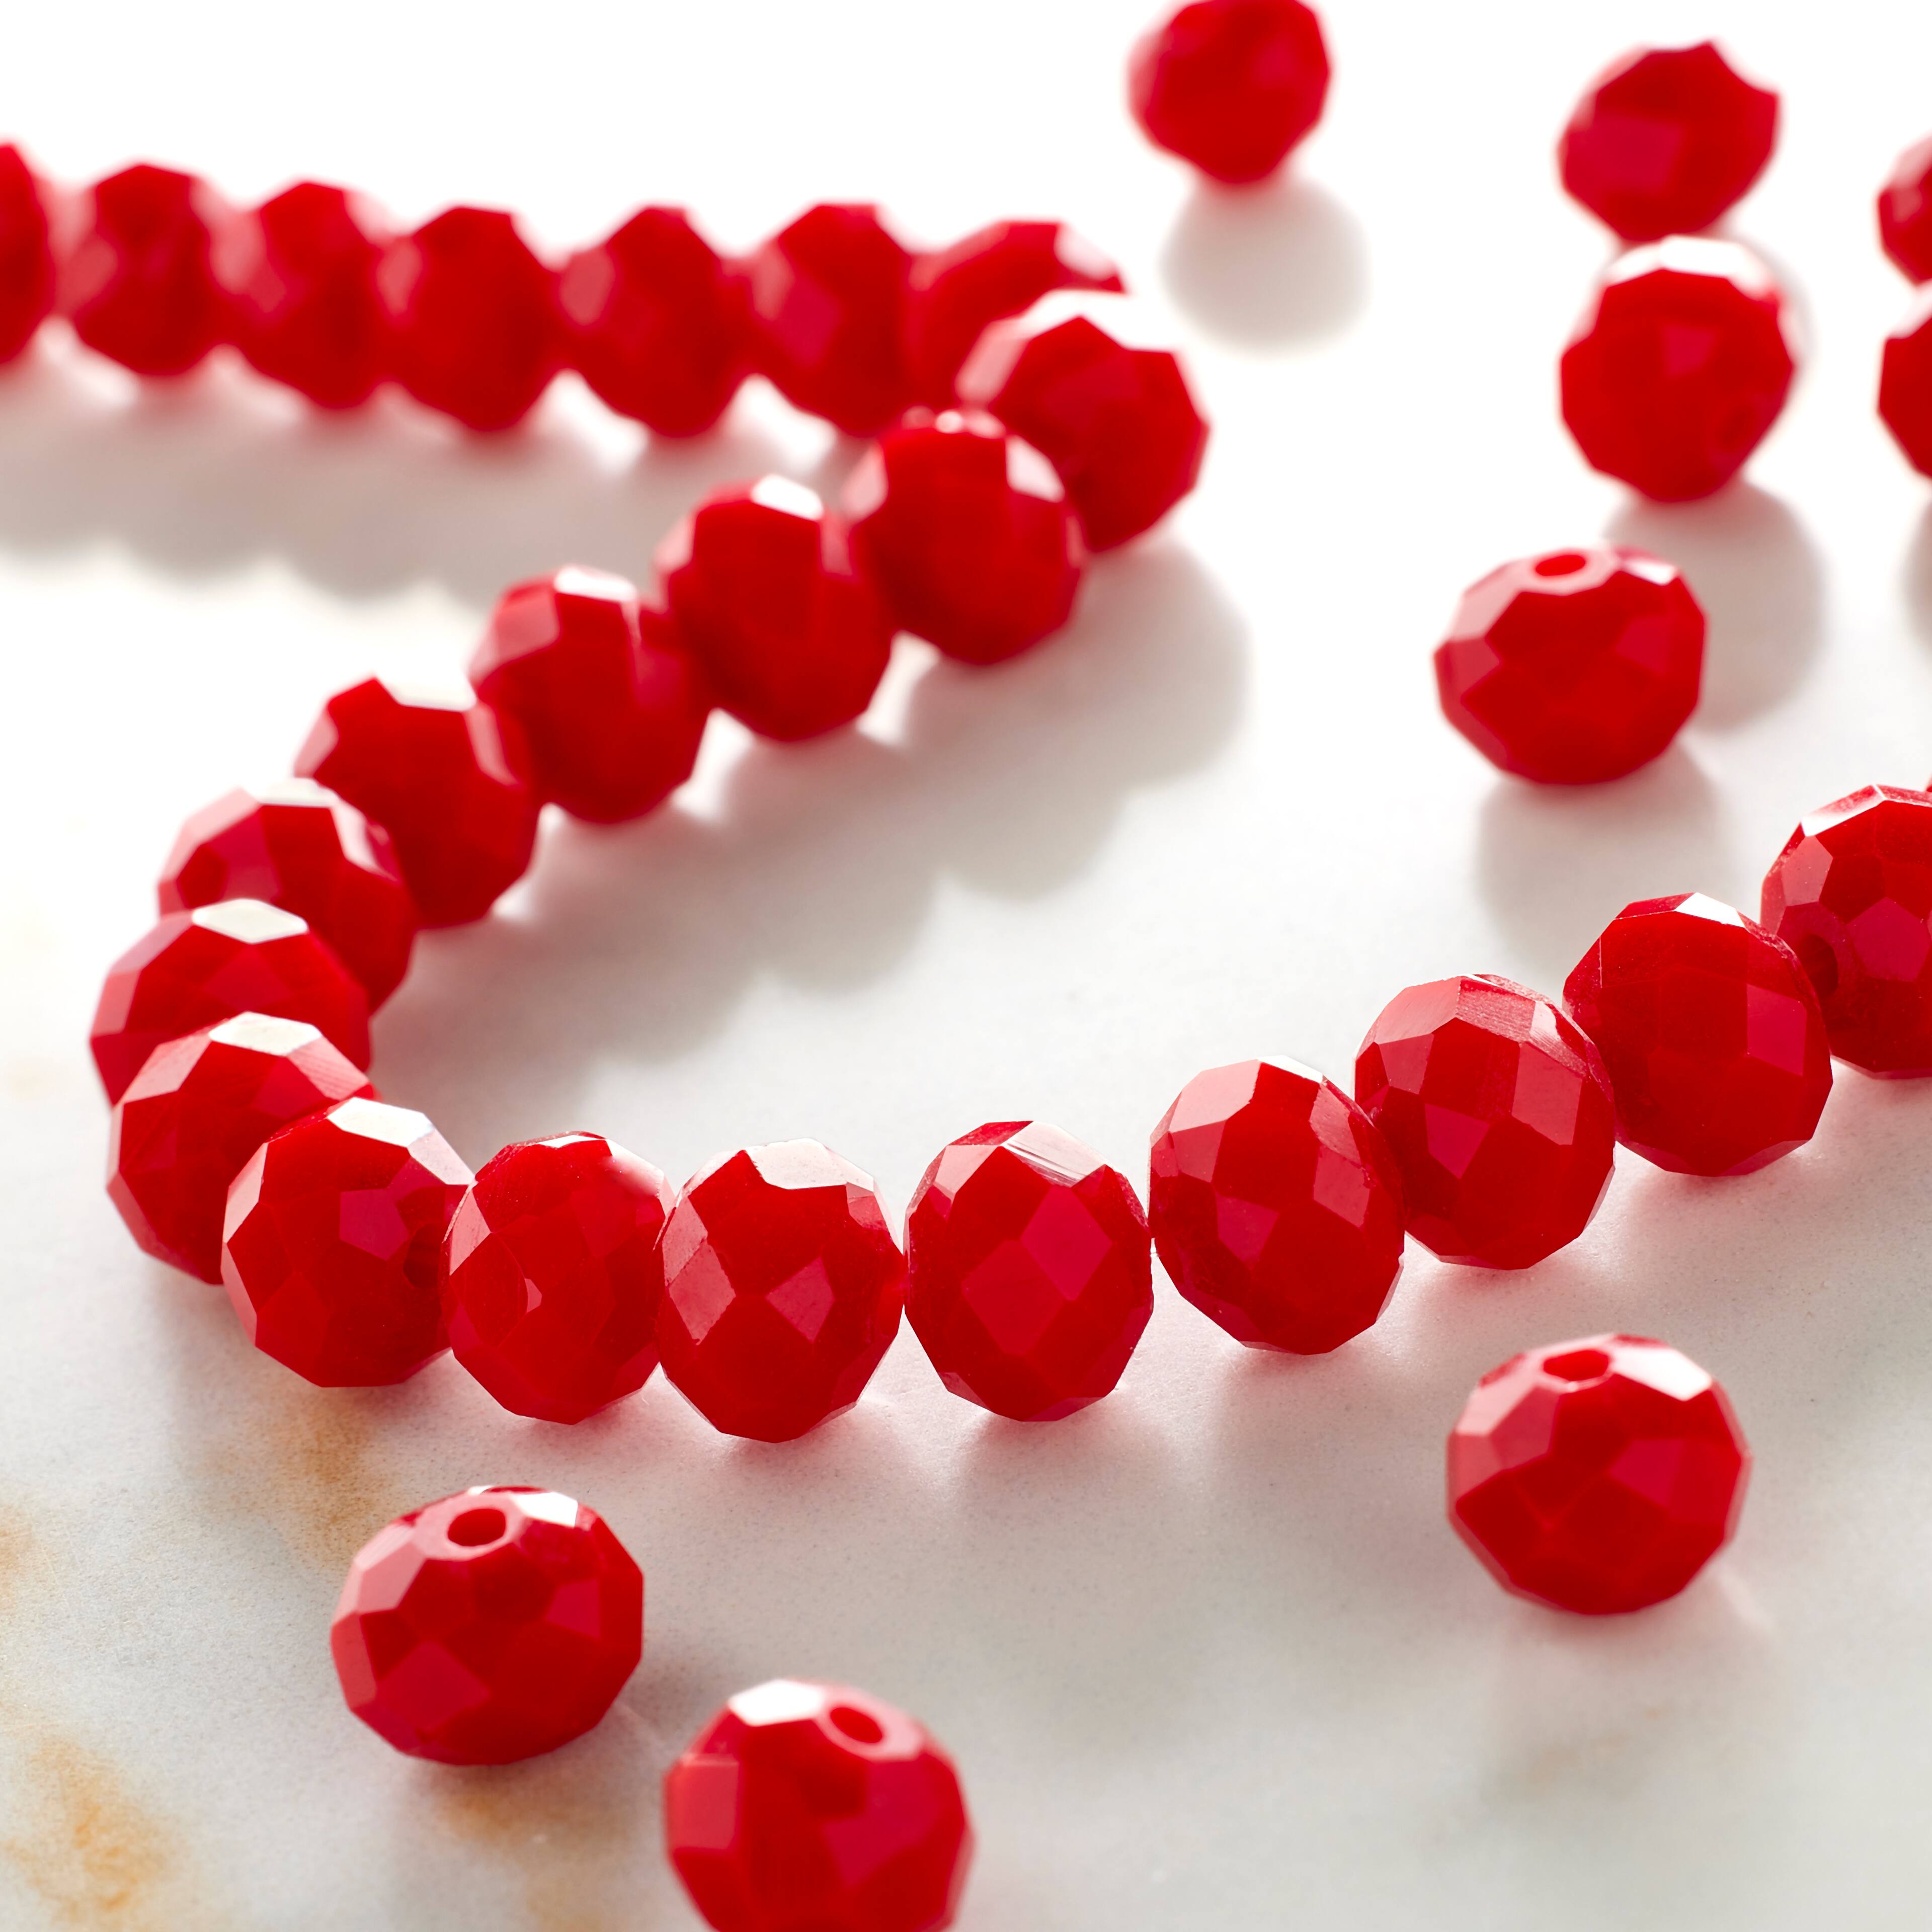 Red 8mm. From Marianne Hobby - Glass Beads round 8mm. - Beads